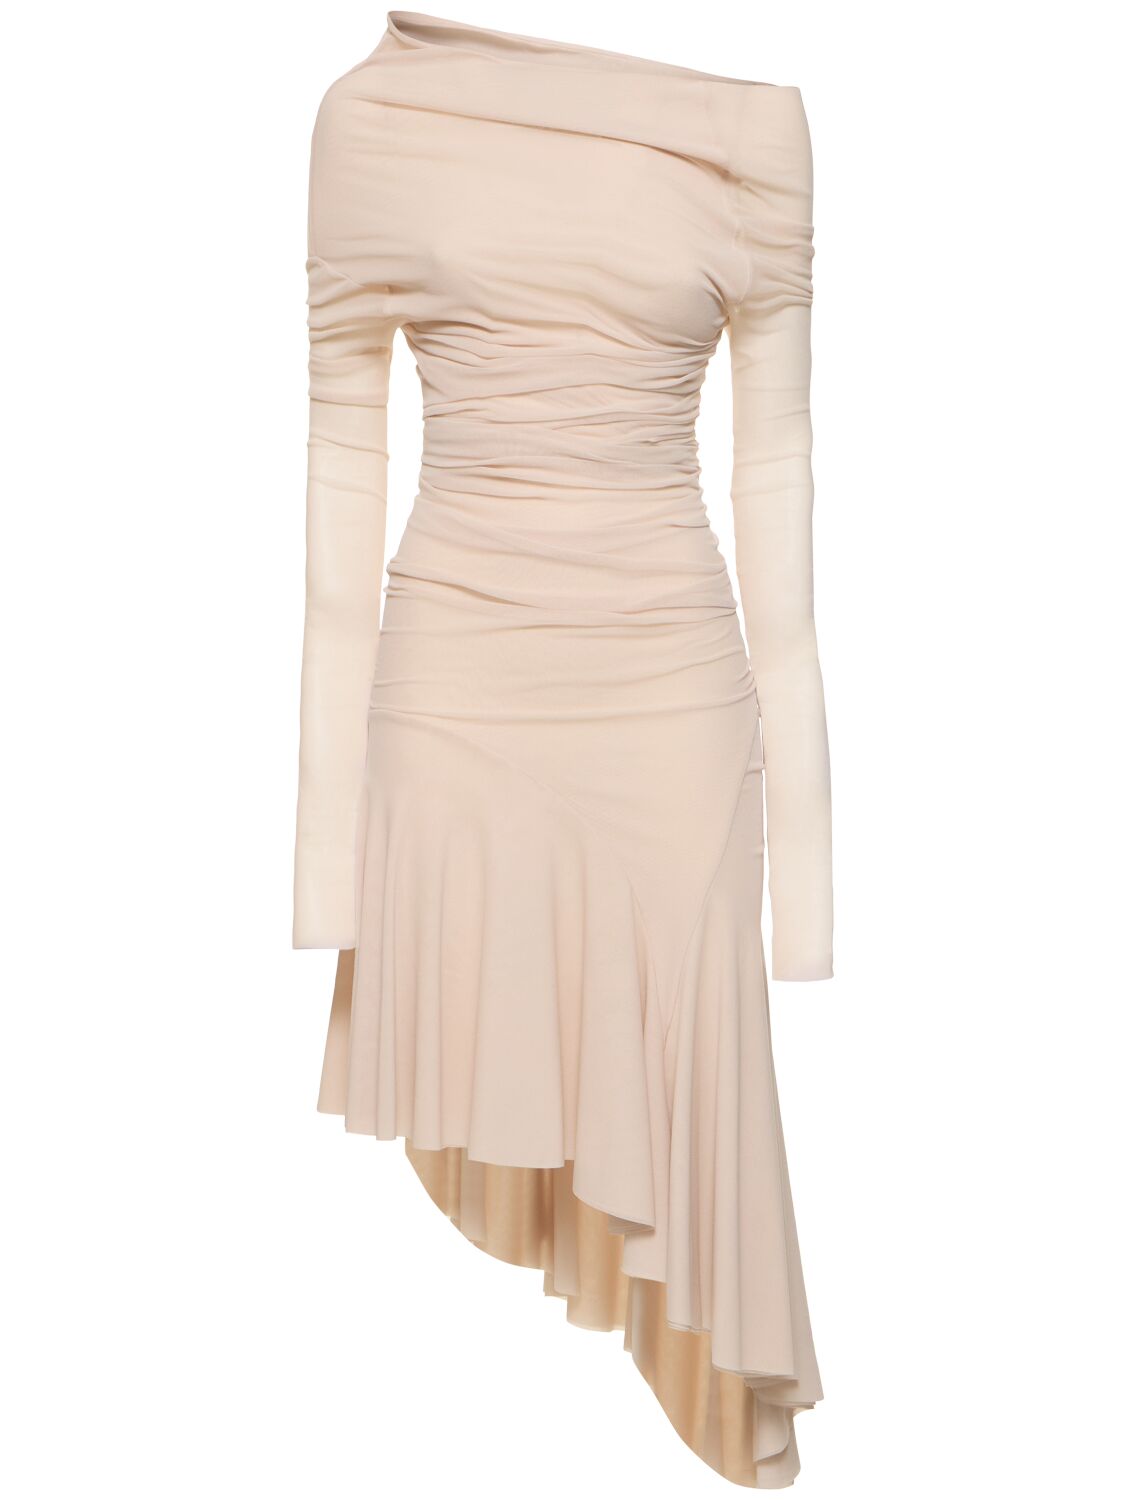 Image of Stretch Tulle Asymmetric Dress